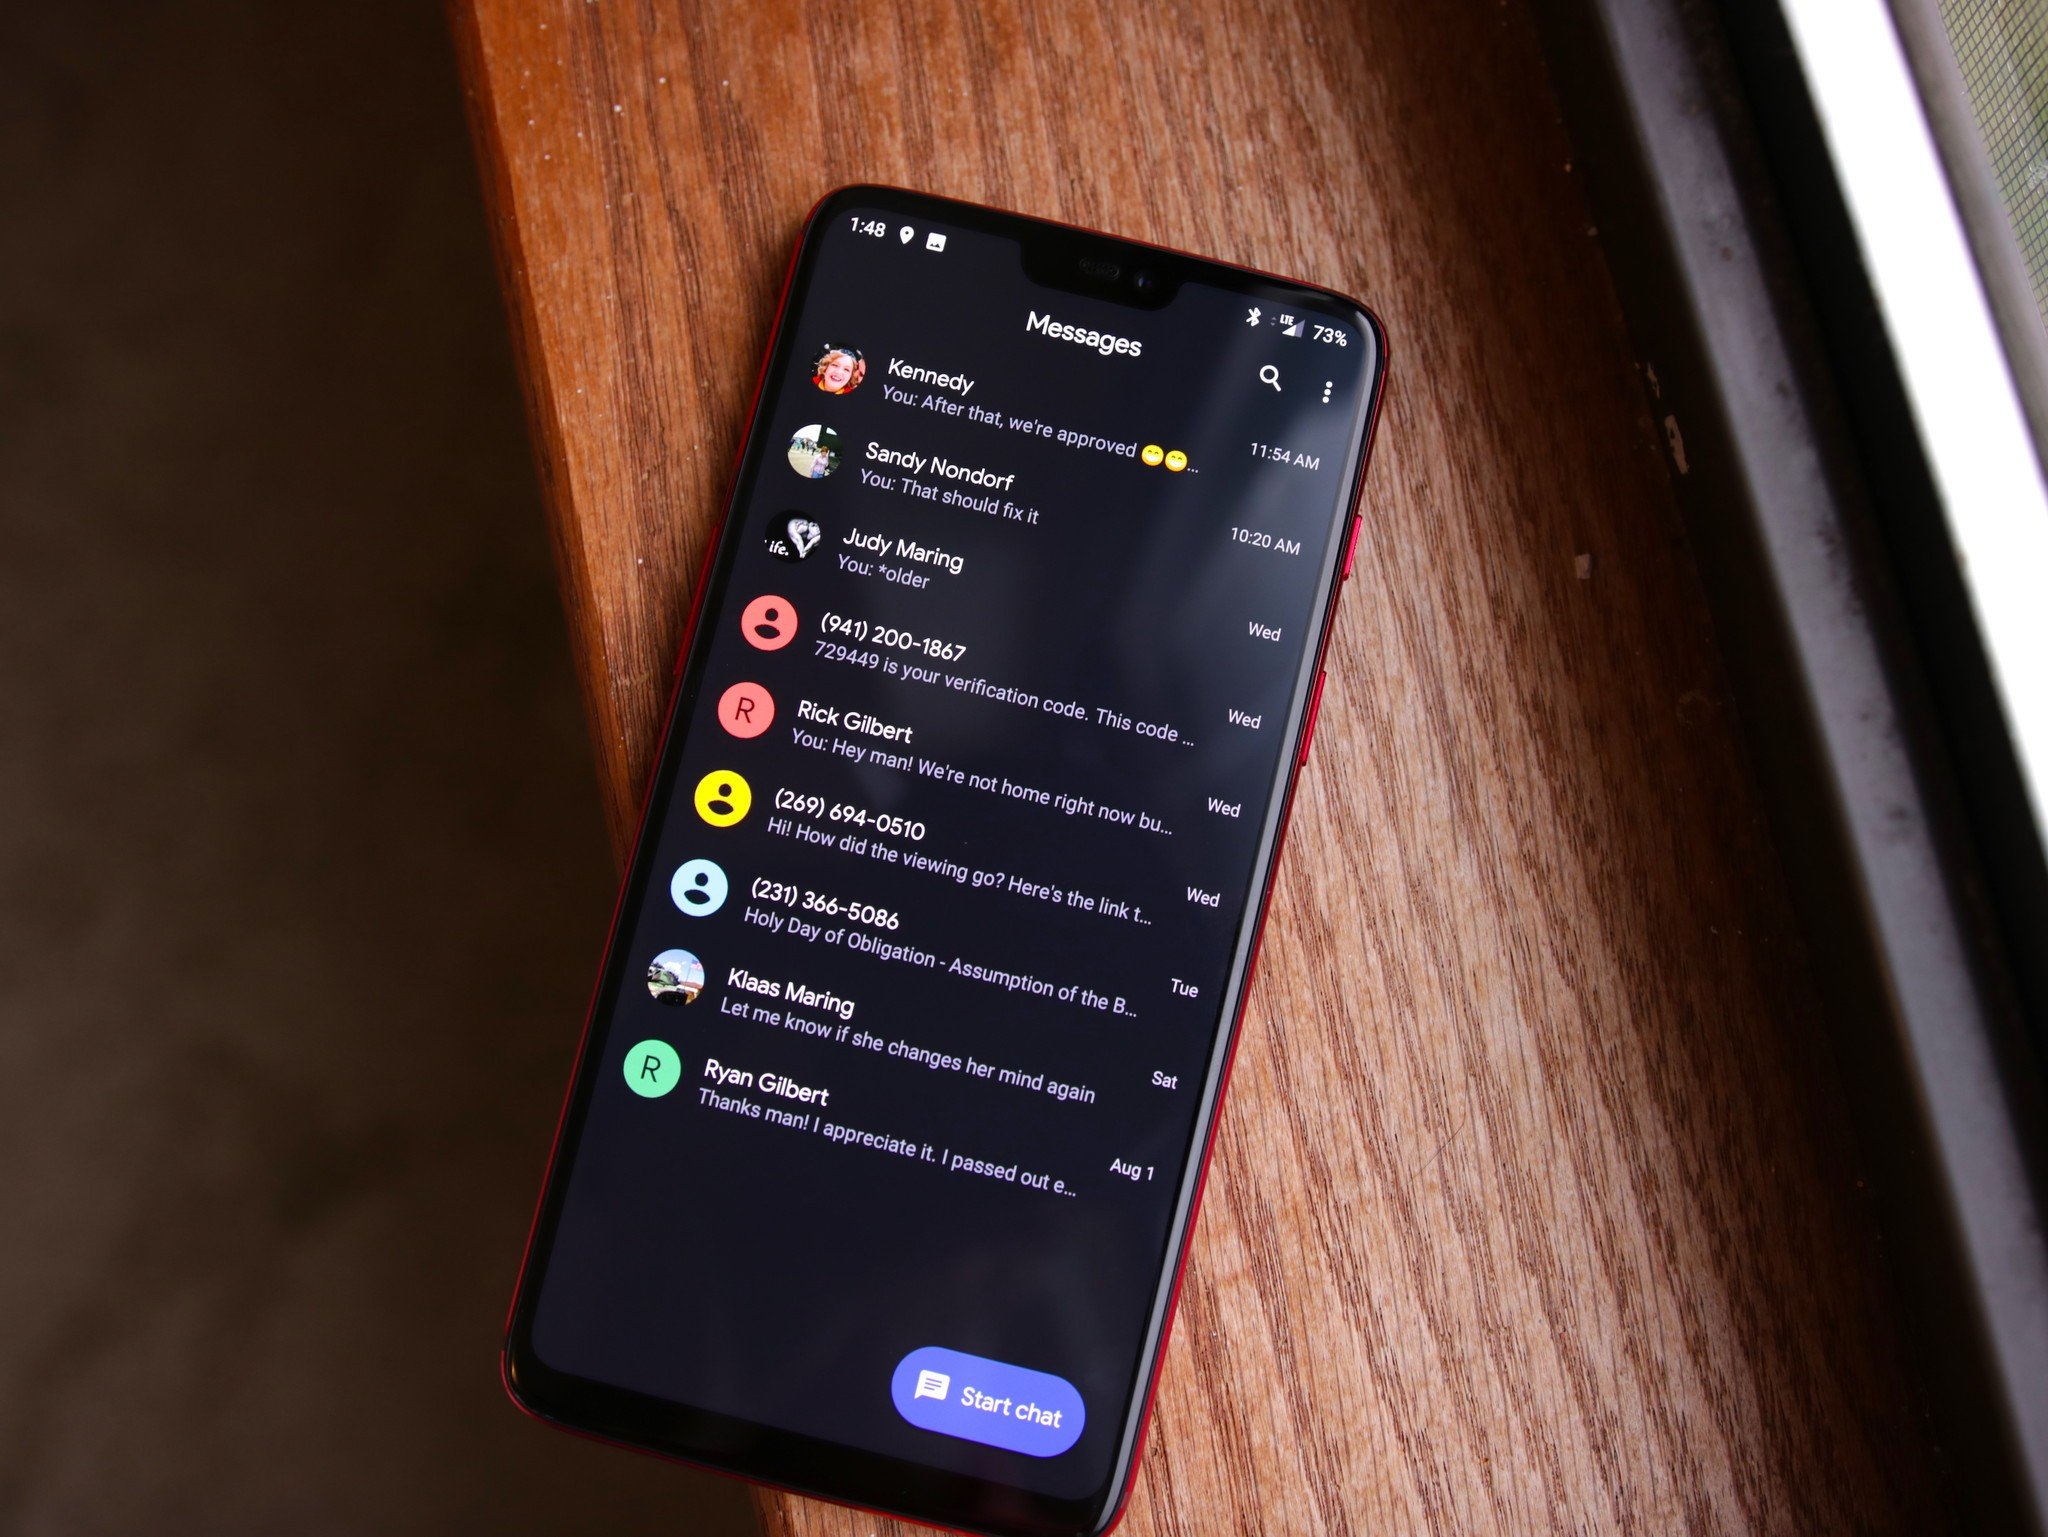 Android Messages with a dark theme 